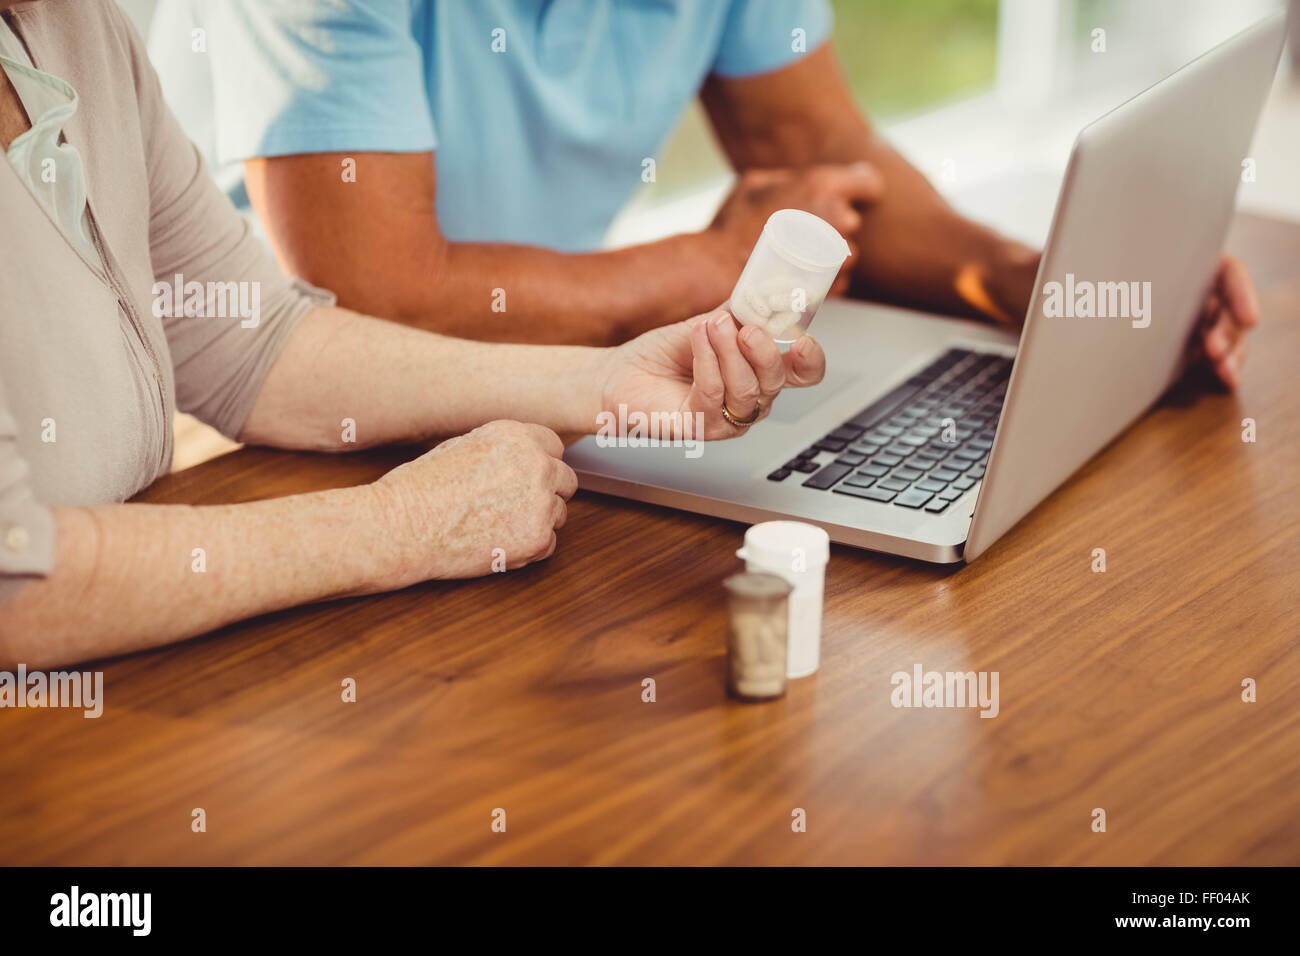 Senior couple using laptop and holding pills Banque D'Images